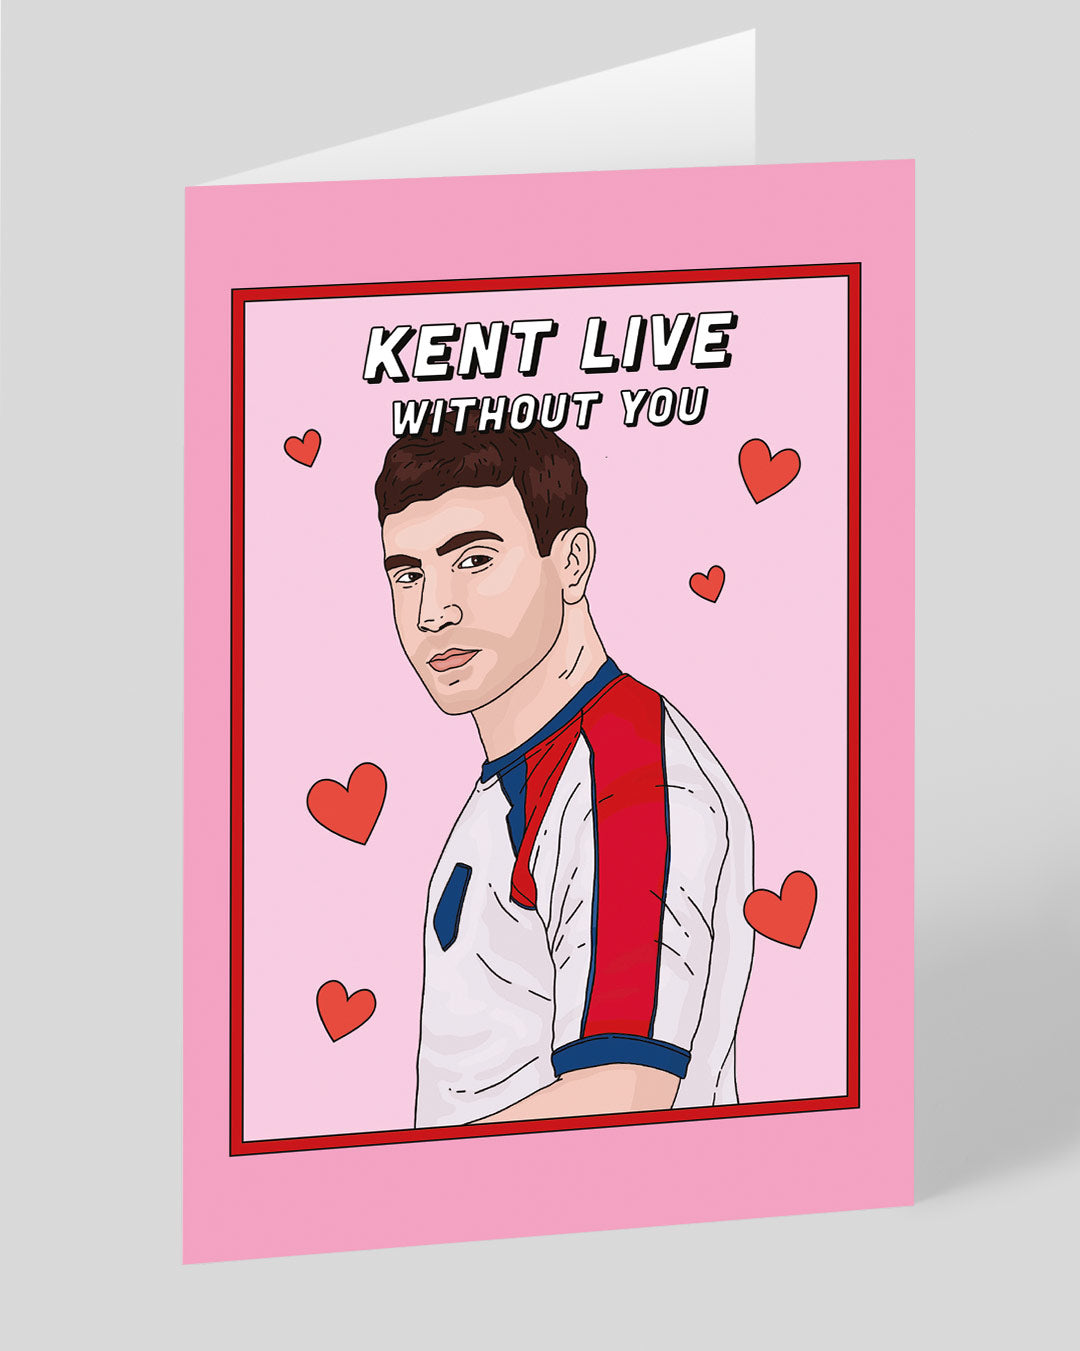 Valentine’s Day | Funny Valentines Card For Ted Lasso Fans | Kent Live Without You Greeting Card | Ohh Deer Unique Valentine’s Card for Him or Her | Made In The UK, Eco-Friendly Materials, Plastic Free Packaging